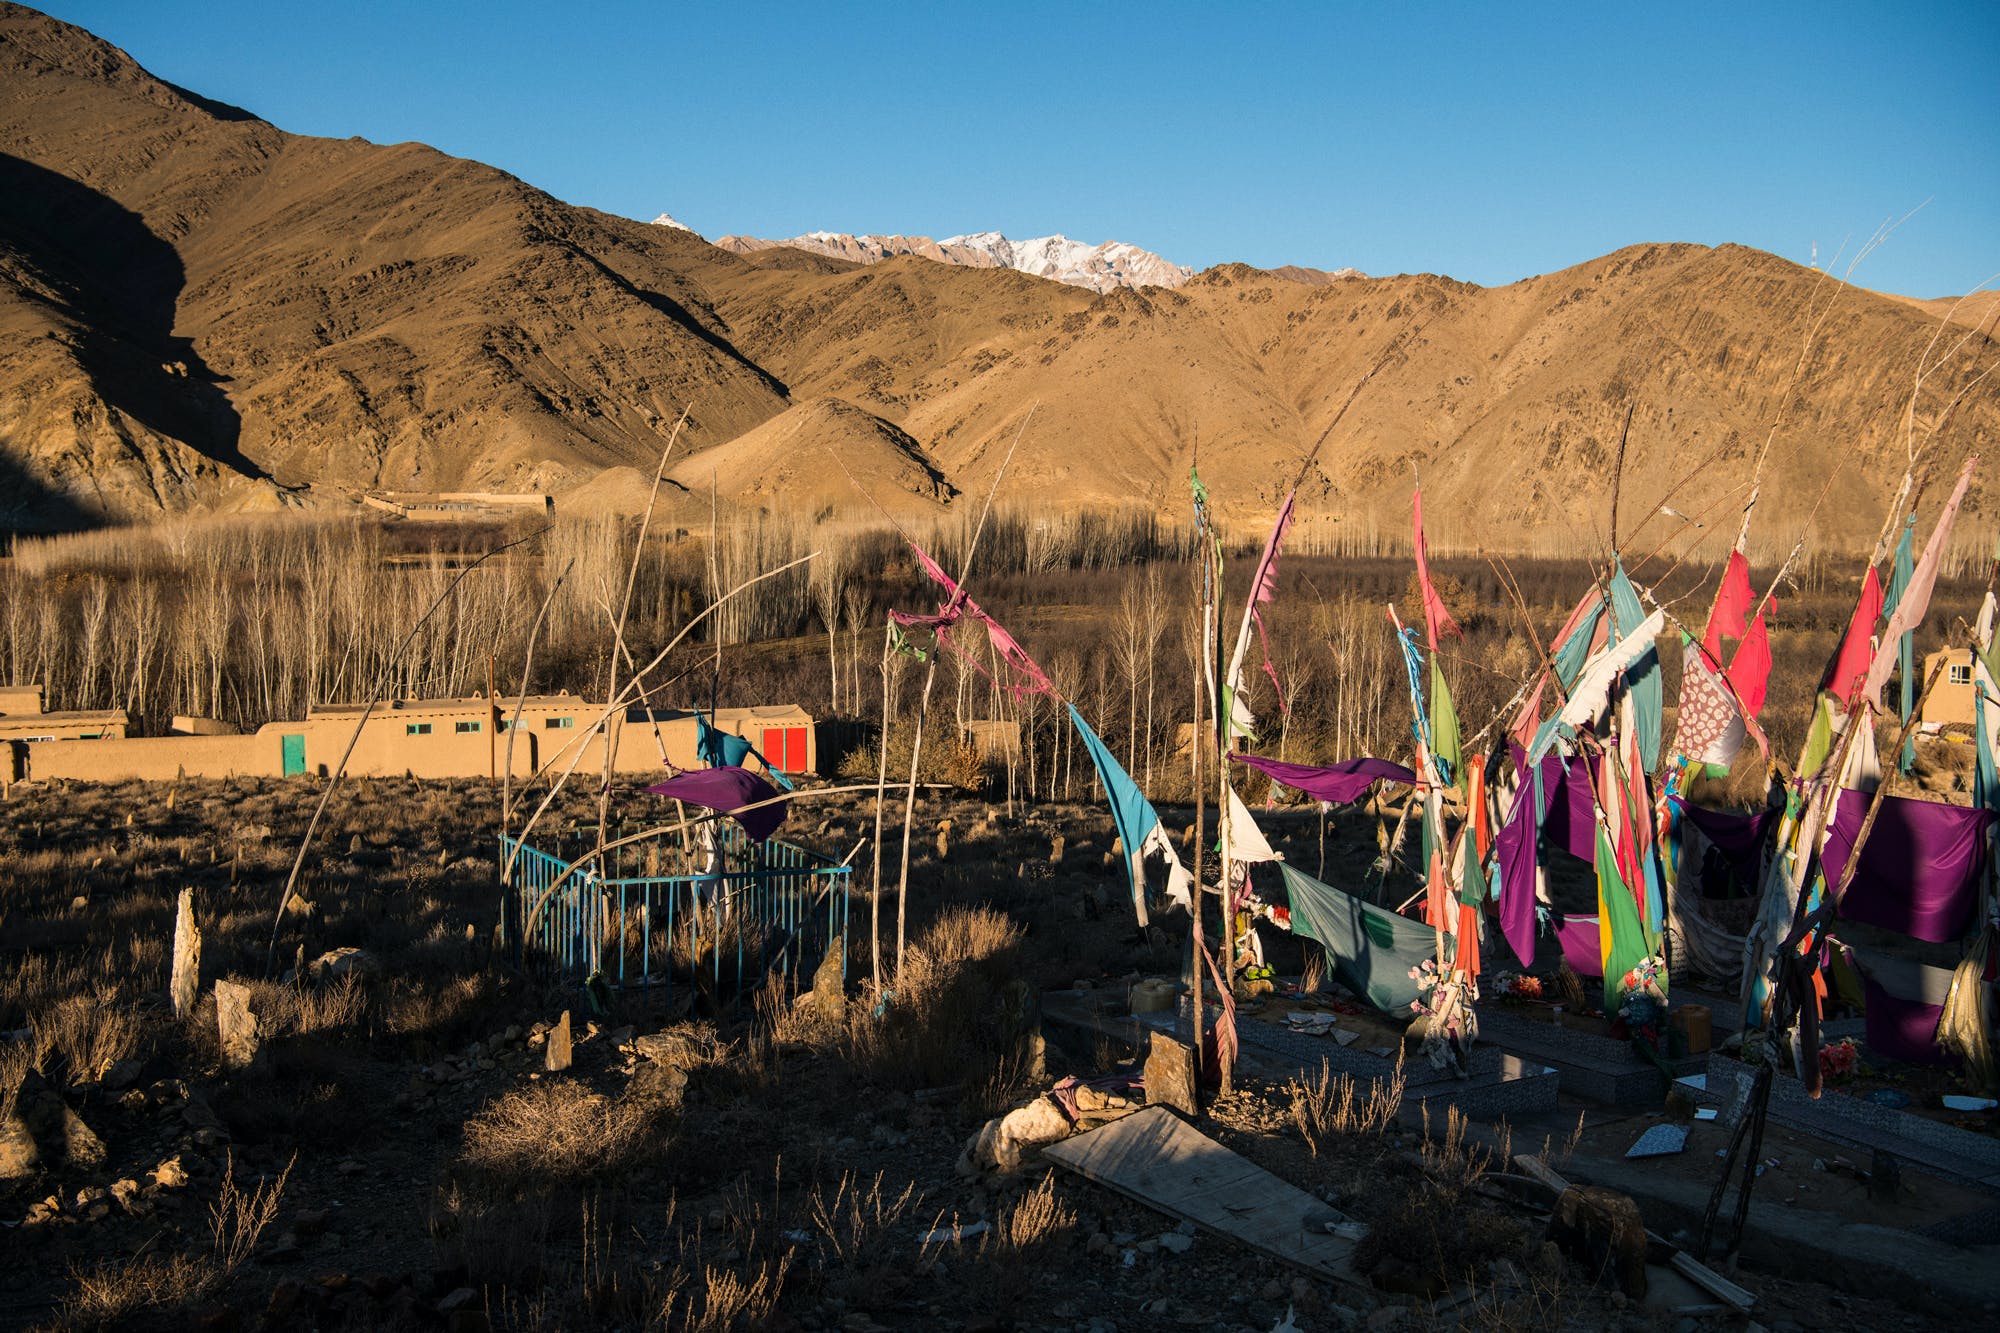 Homemade flags mark the graves of a mother and three children, ages 6, 8, and 15, who were killed in a 01 night raid in the village of Sher Toghi, Daymirdad District, on the night of March 2 and the morning of March 3, 2019. The 15-year-old was shot when he ran outside to look for help after a bomb hit the family home. Relatives found the bodies of the mother and daughters beneath the ruins of their house the next morning. It isn’t known whether they succumbed to injuries from the air strikes or the freezing temperatures overnight.